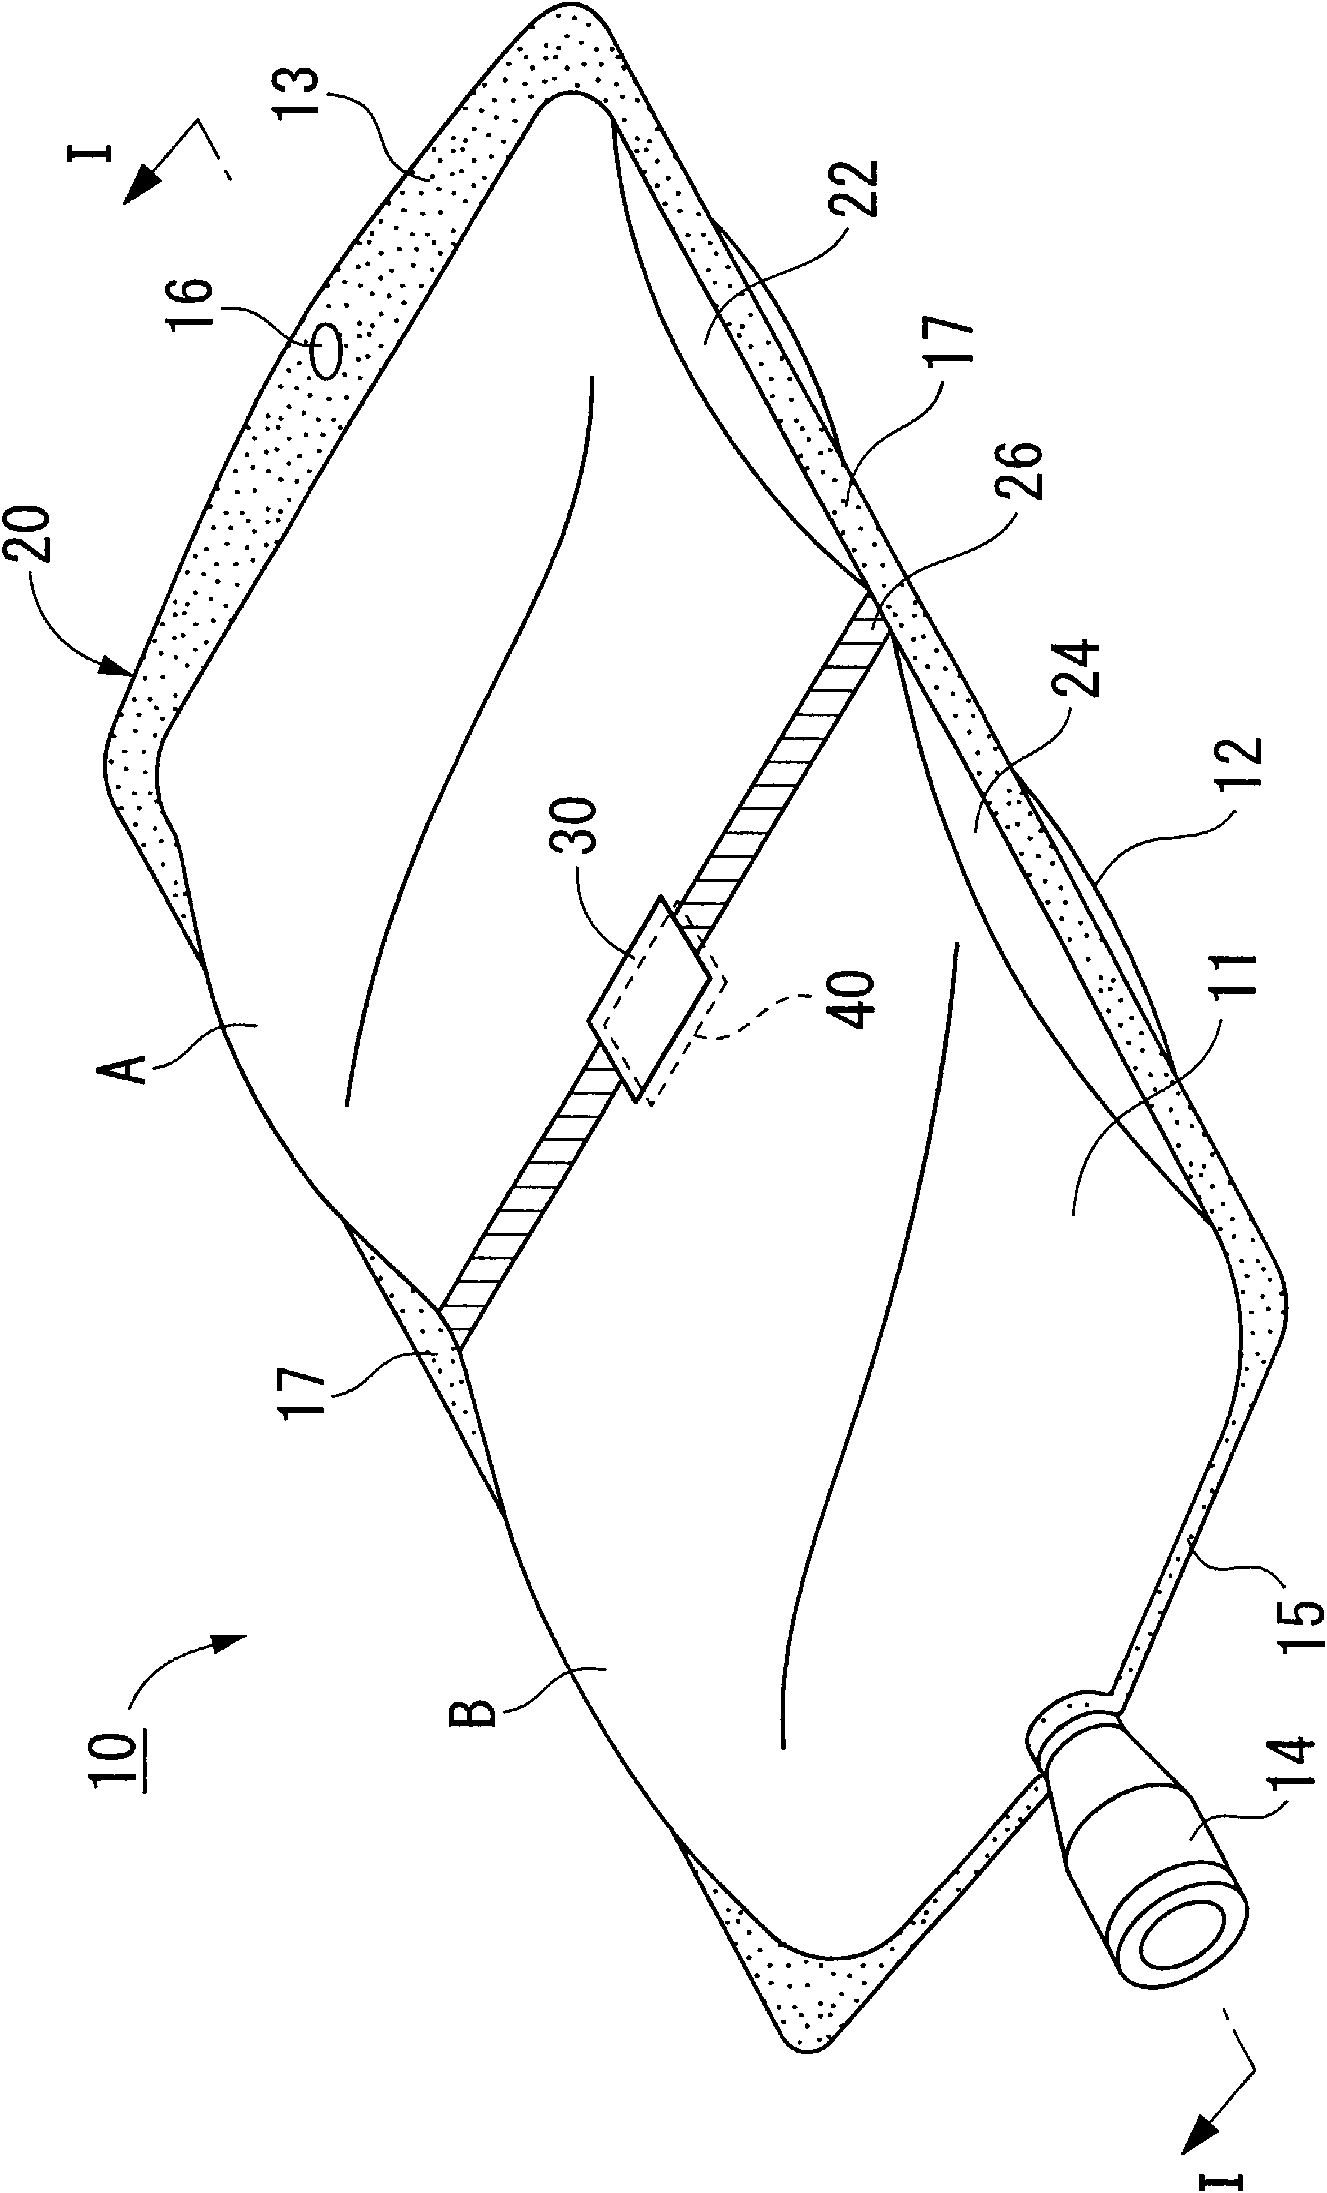 Medical multi-chamber container, method for recognizing the mixing of medicaments using same, system for preventing misuse of medical multi-chamber container, and medicaments-containing medical multi-chamber container